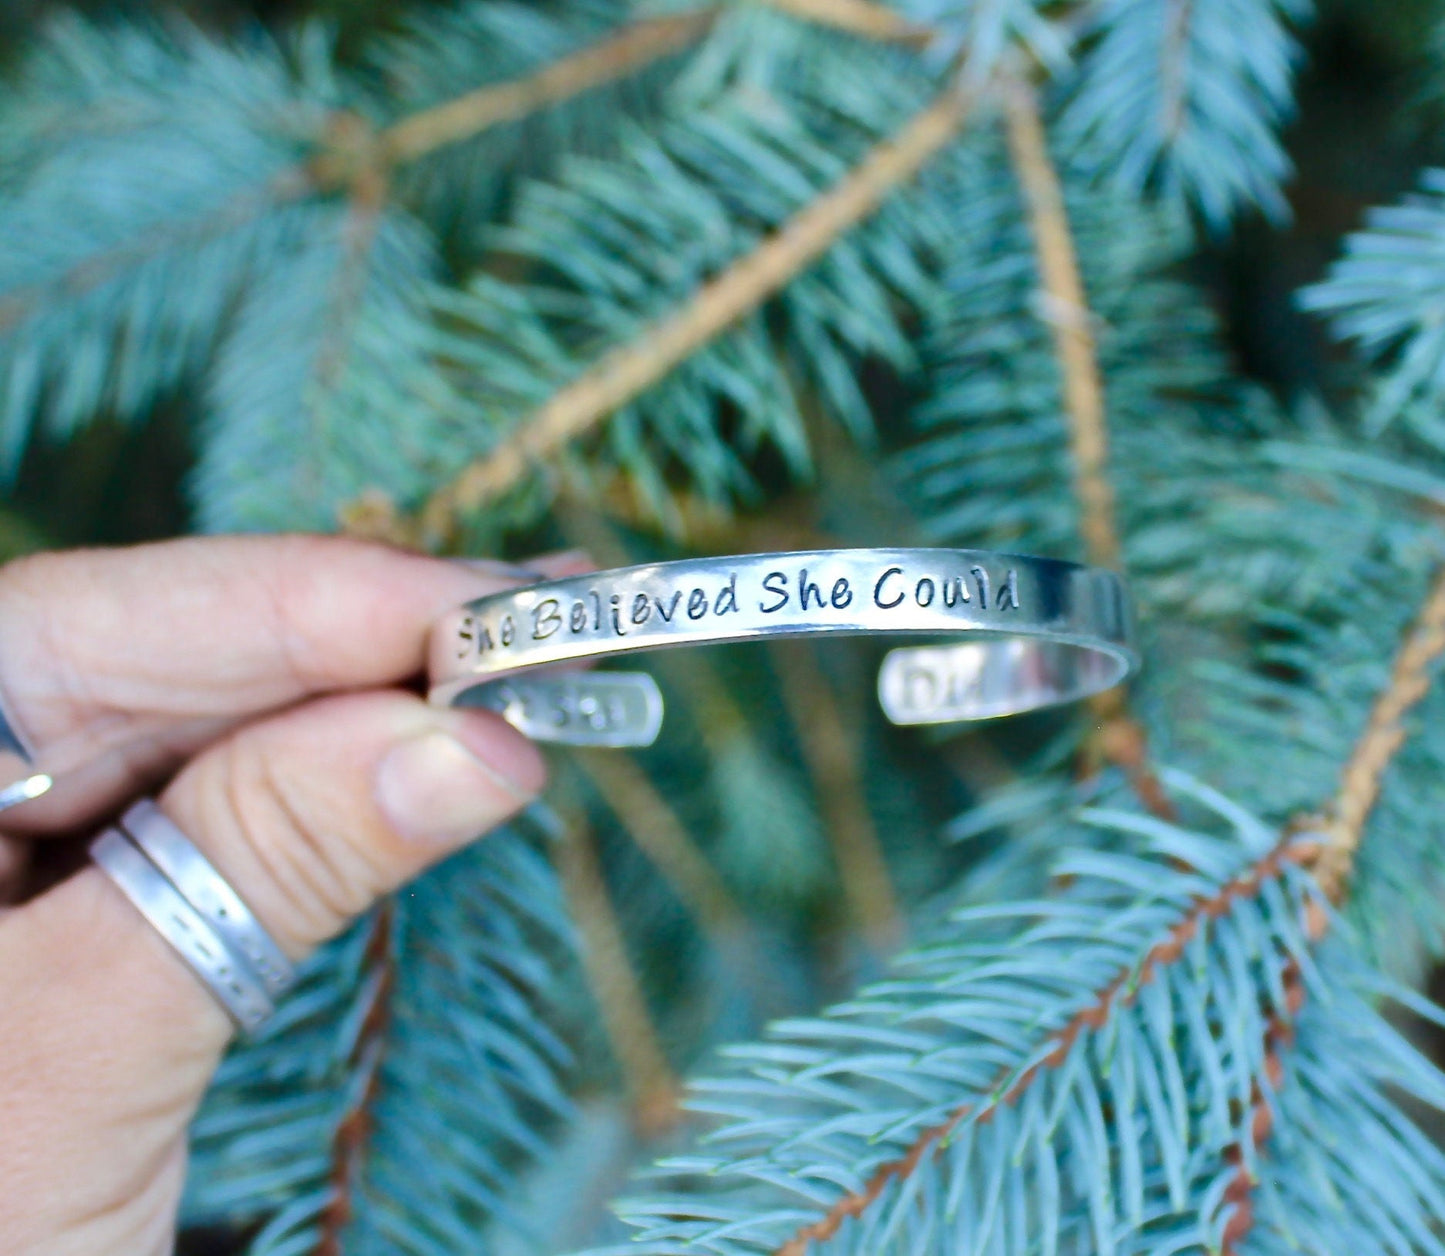 She Believed She Could So She Did Bangle Cuff bracelet in Aluminum